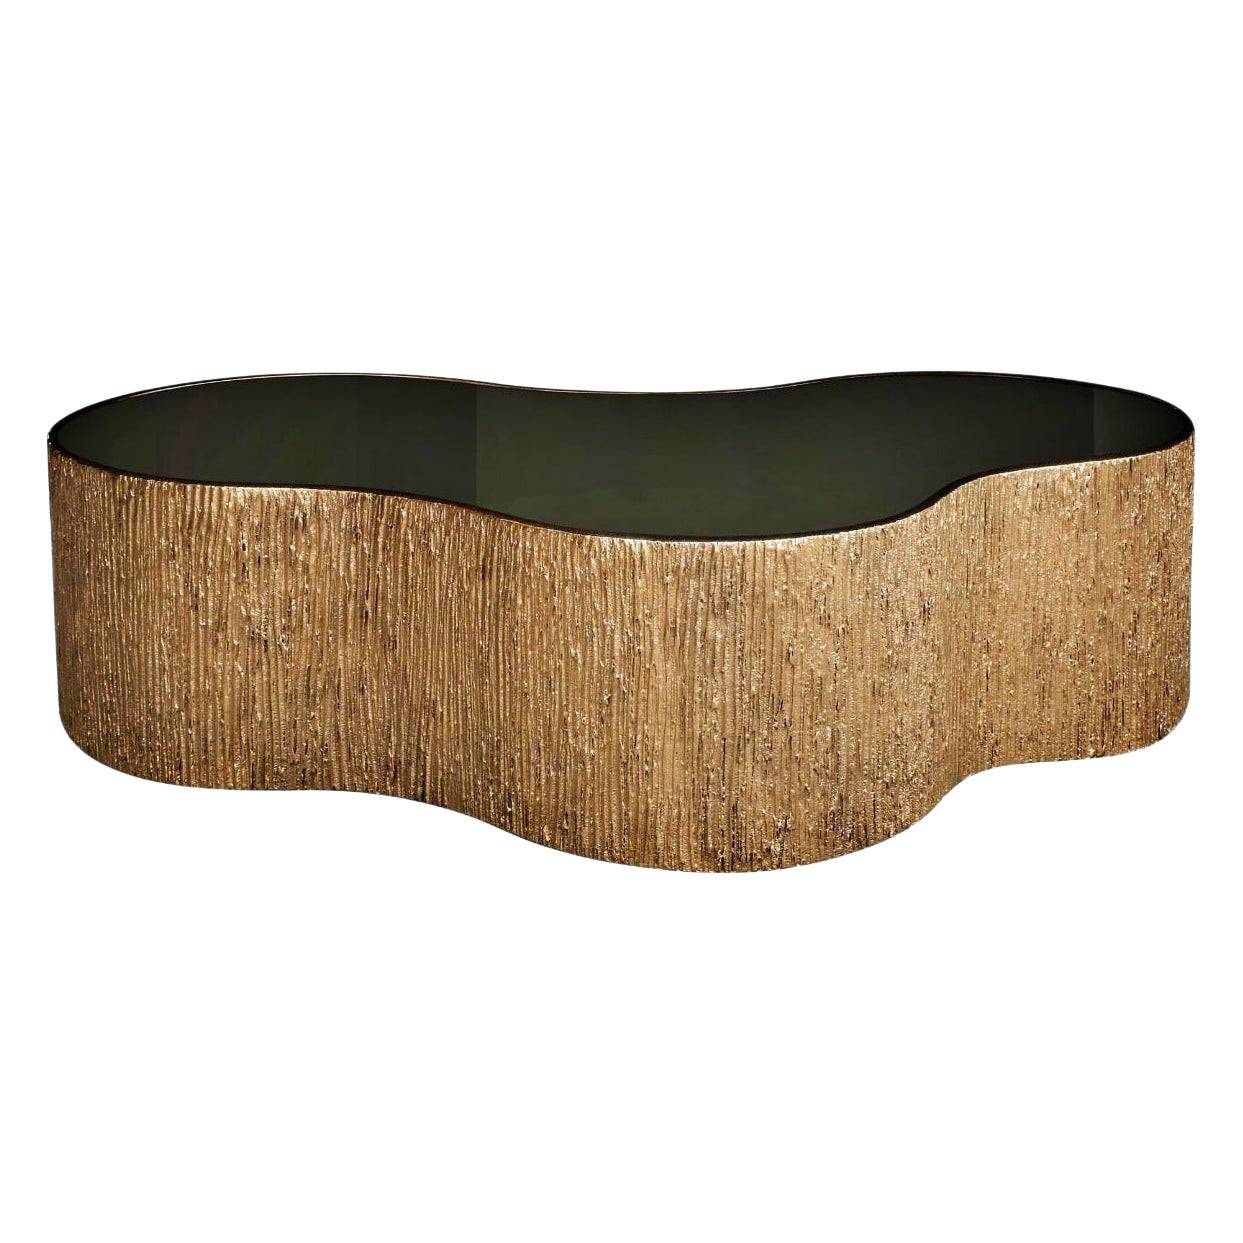 New Design Coffee Table in Bronze Mirror, with Polished Edge Gold